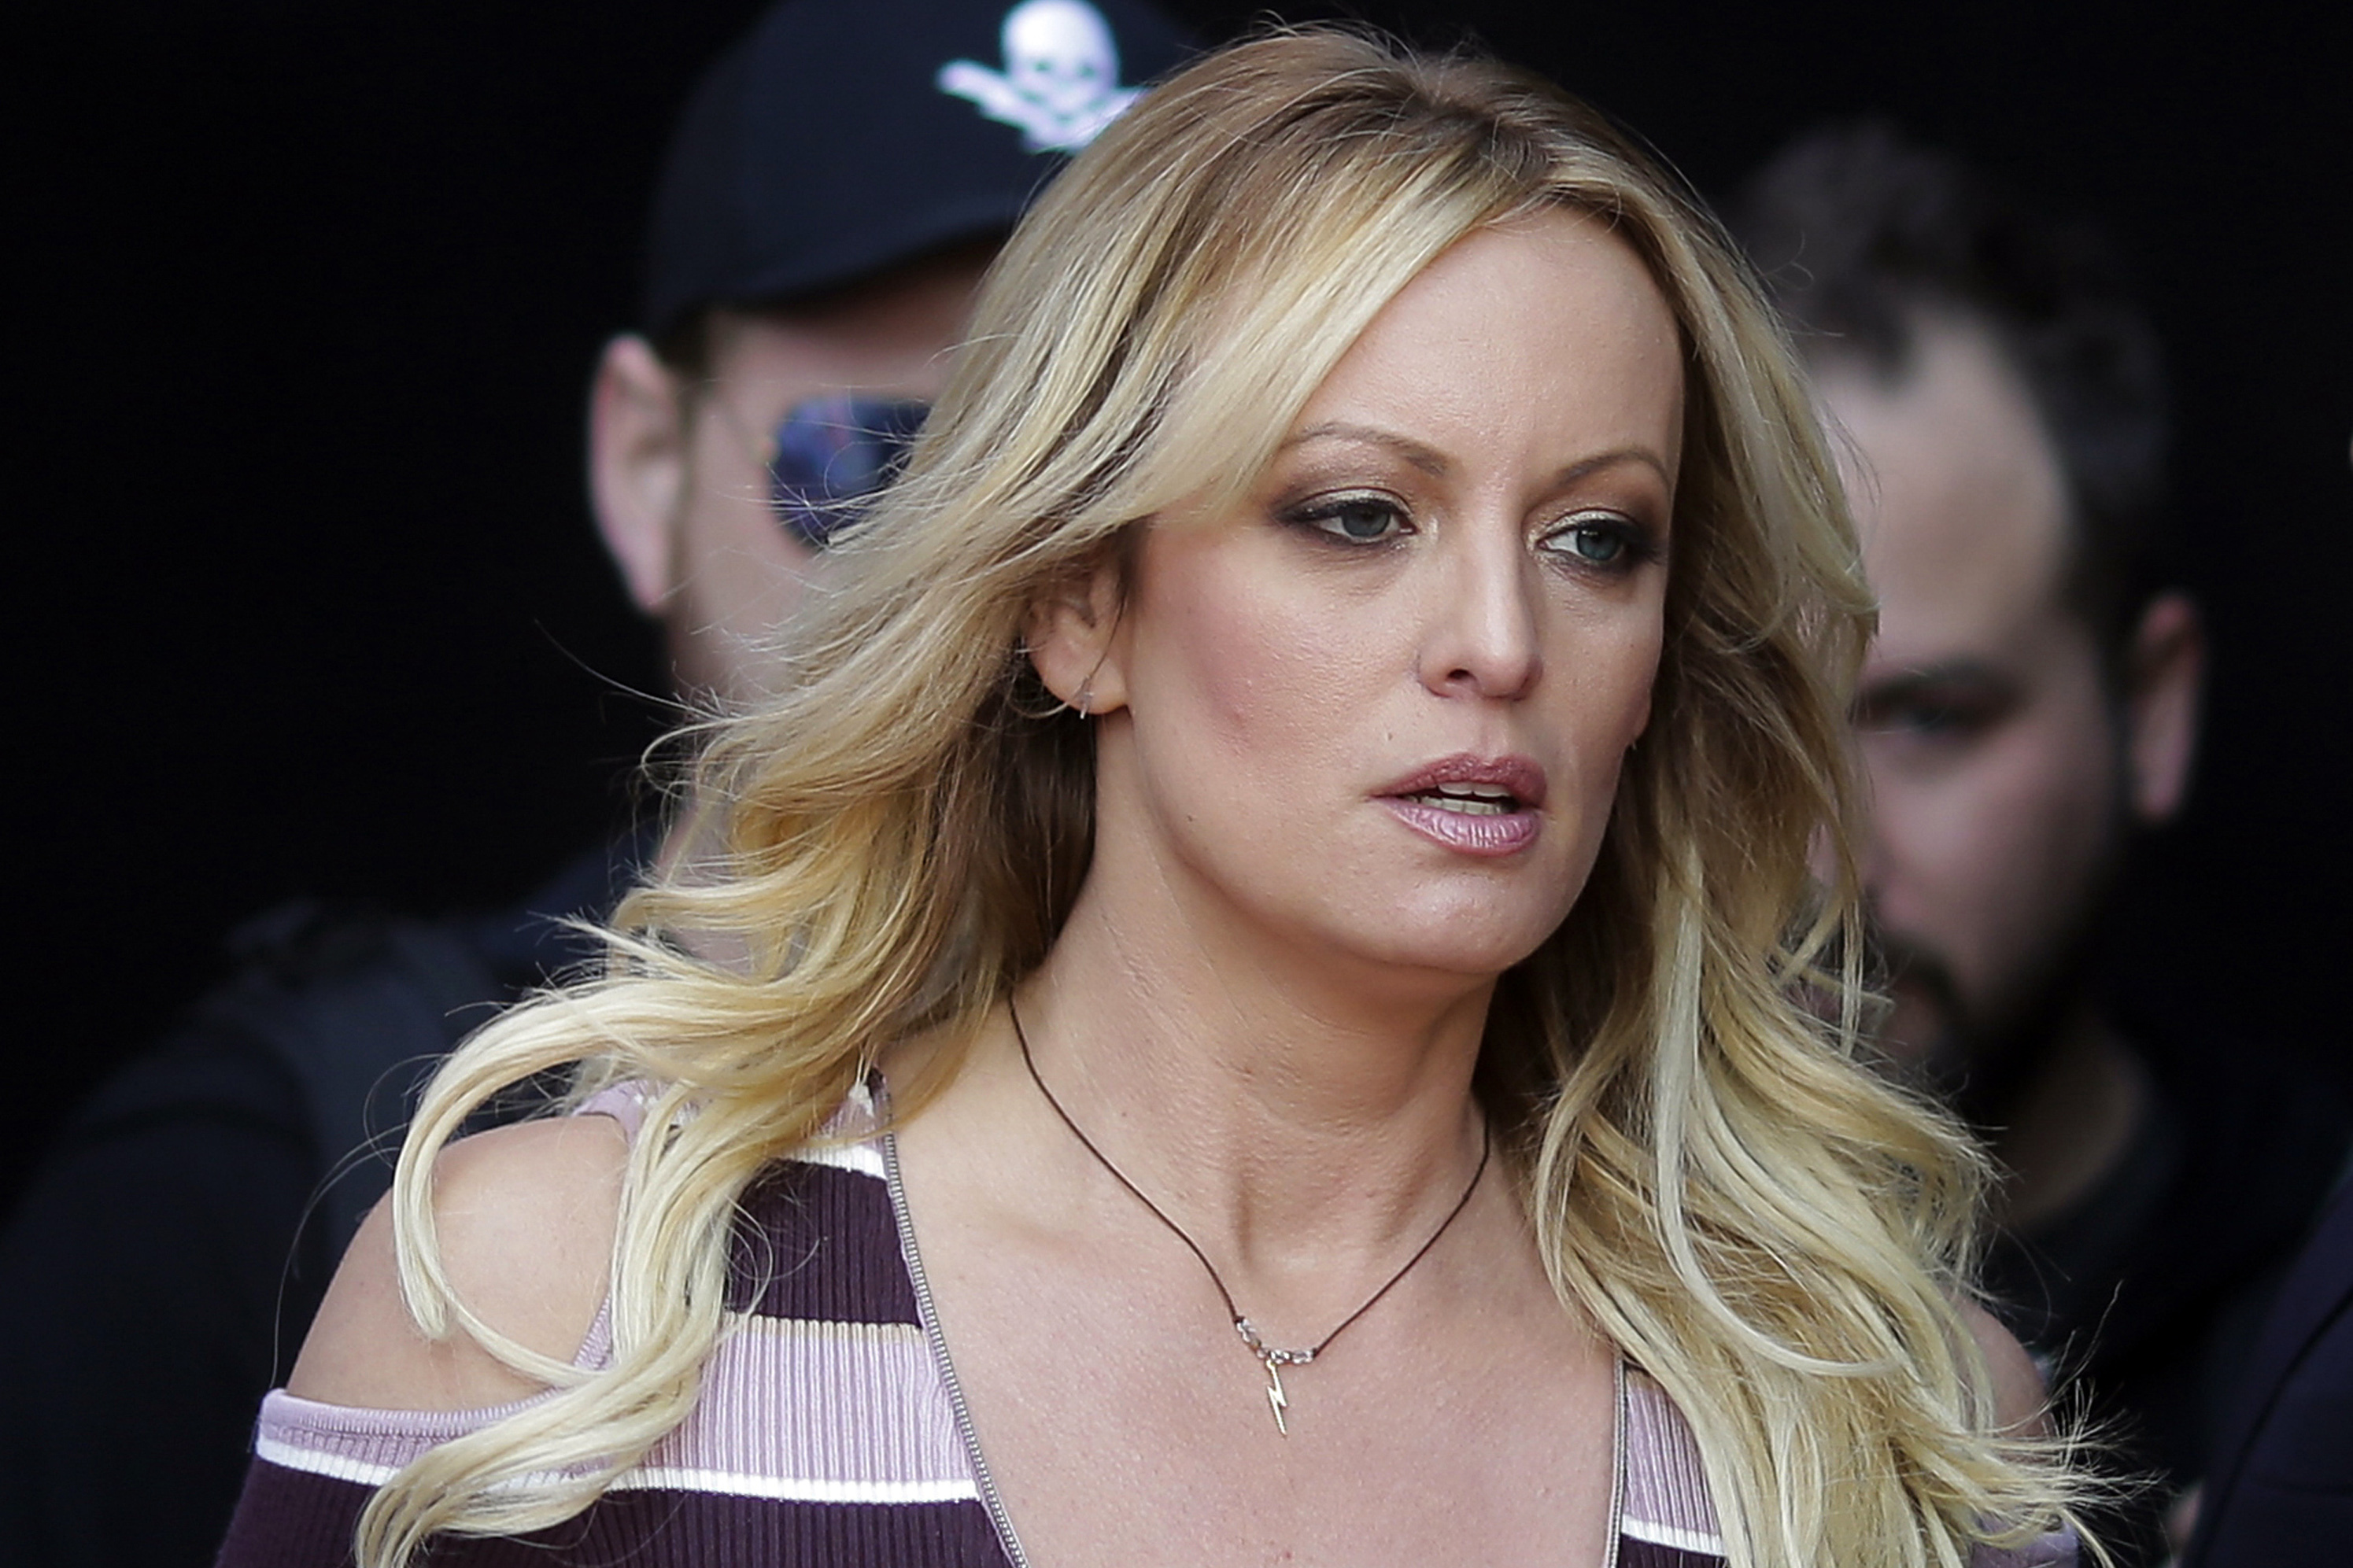 Porn actor Stormy Daniels meets with prosecutors investigating hush money -  The Boston Globe